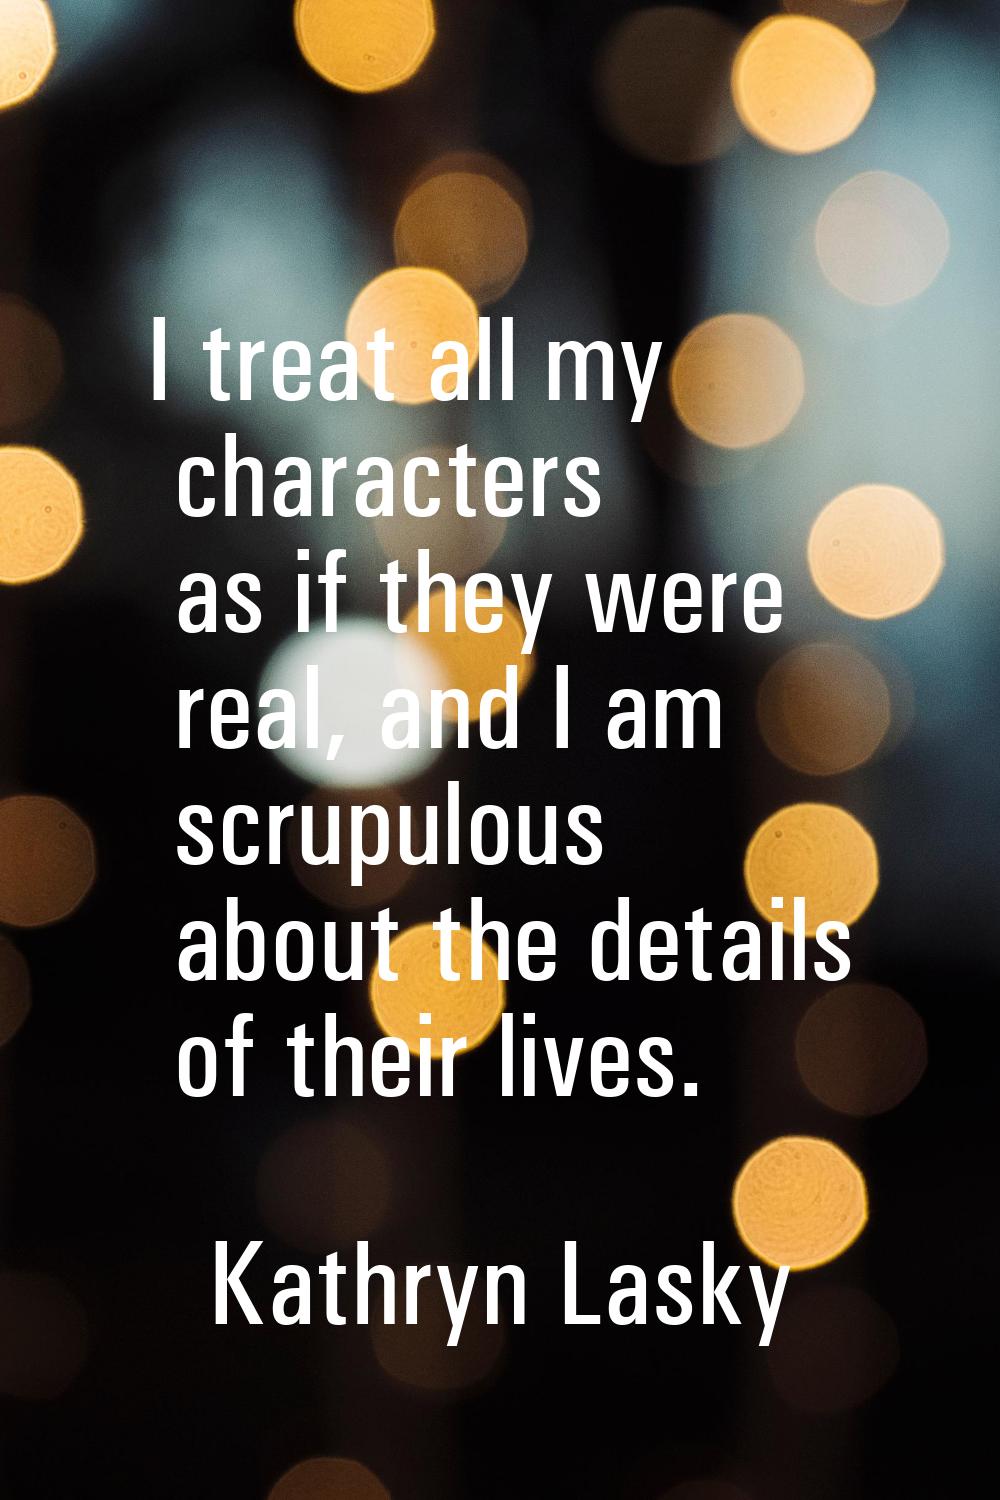 I treat all my characters as if they were real, and I am scrupulous about the details of their live